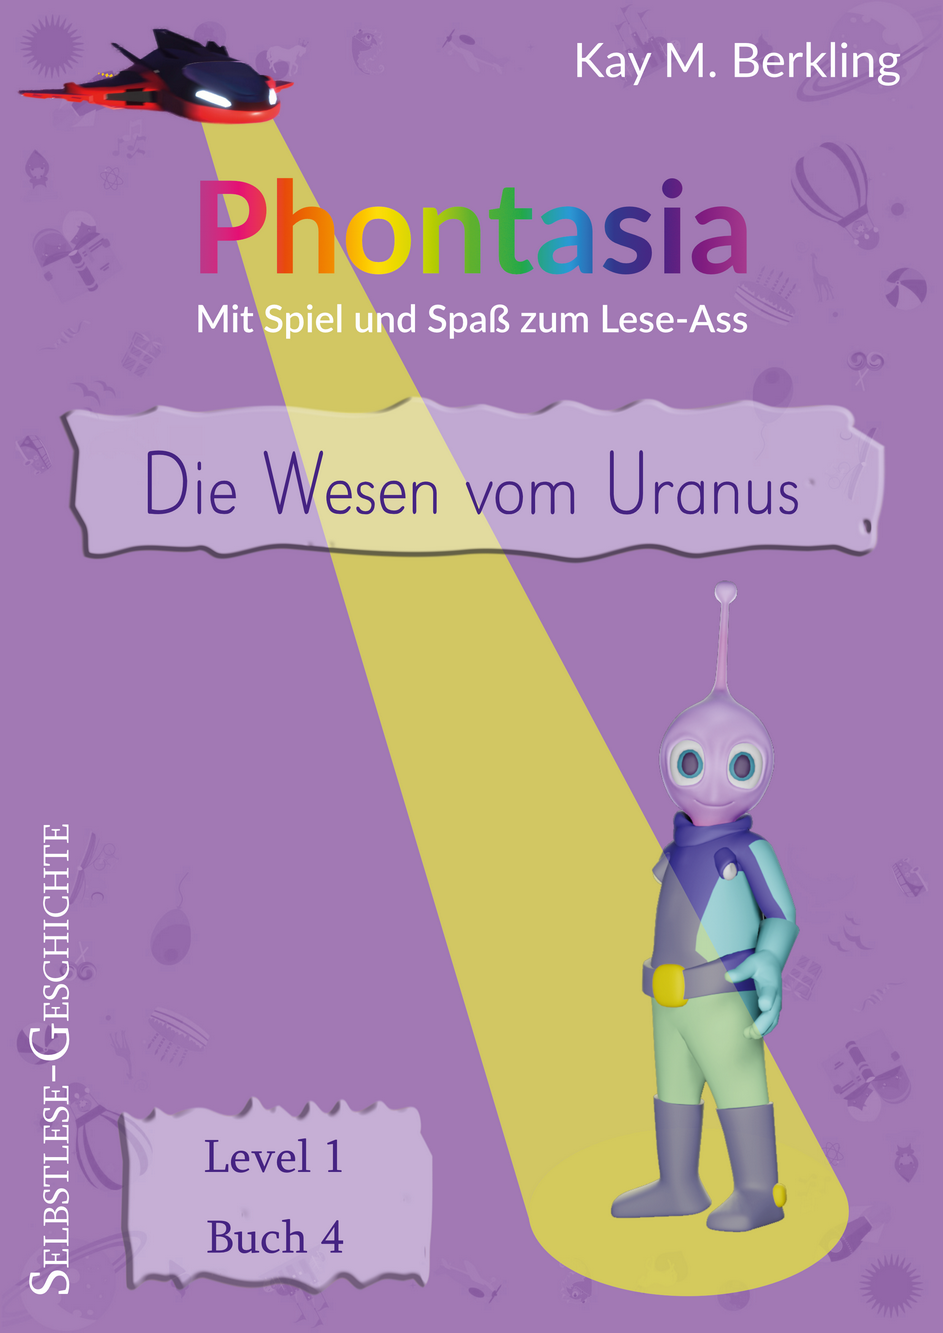 Phontasia: Cover Selbstlese-Geschichte Level 1.4